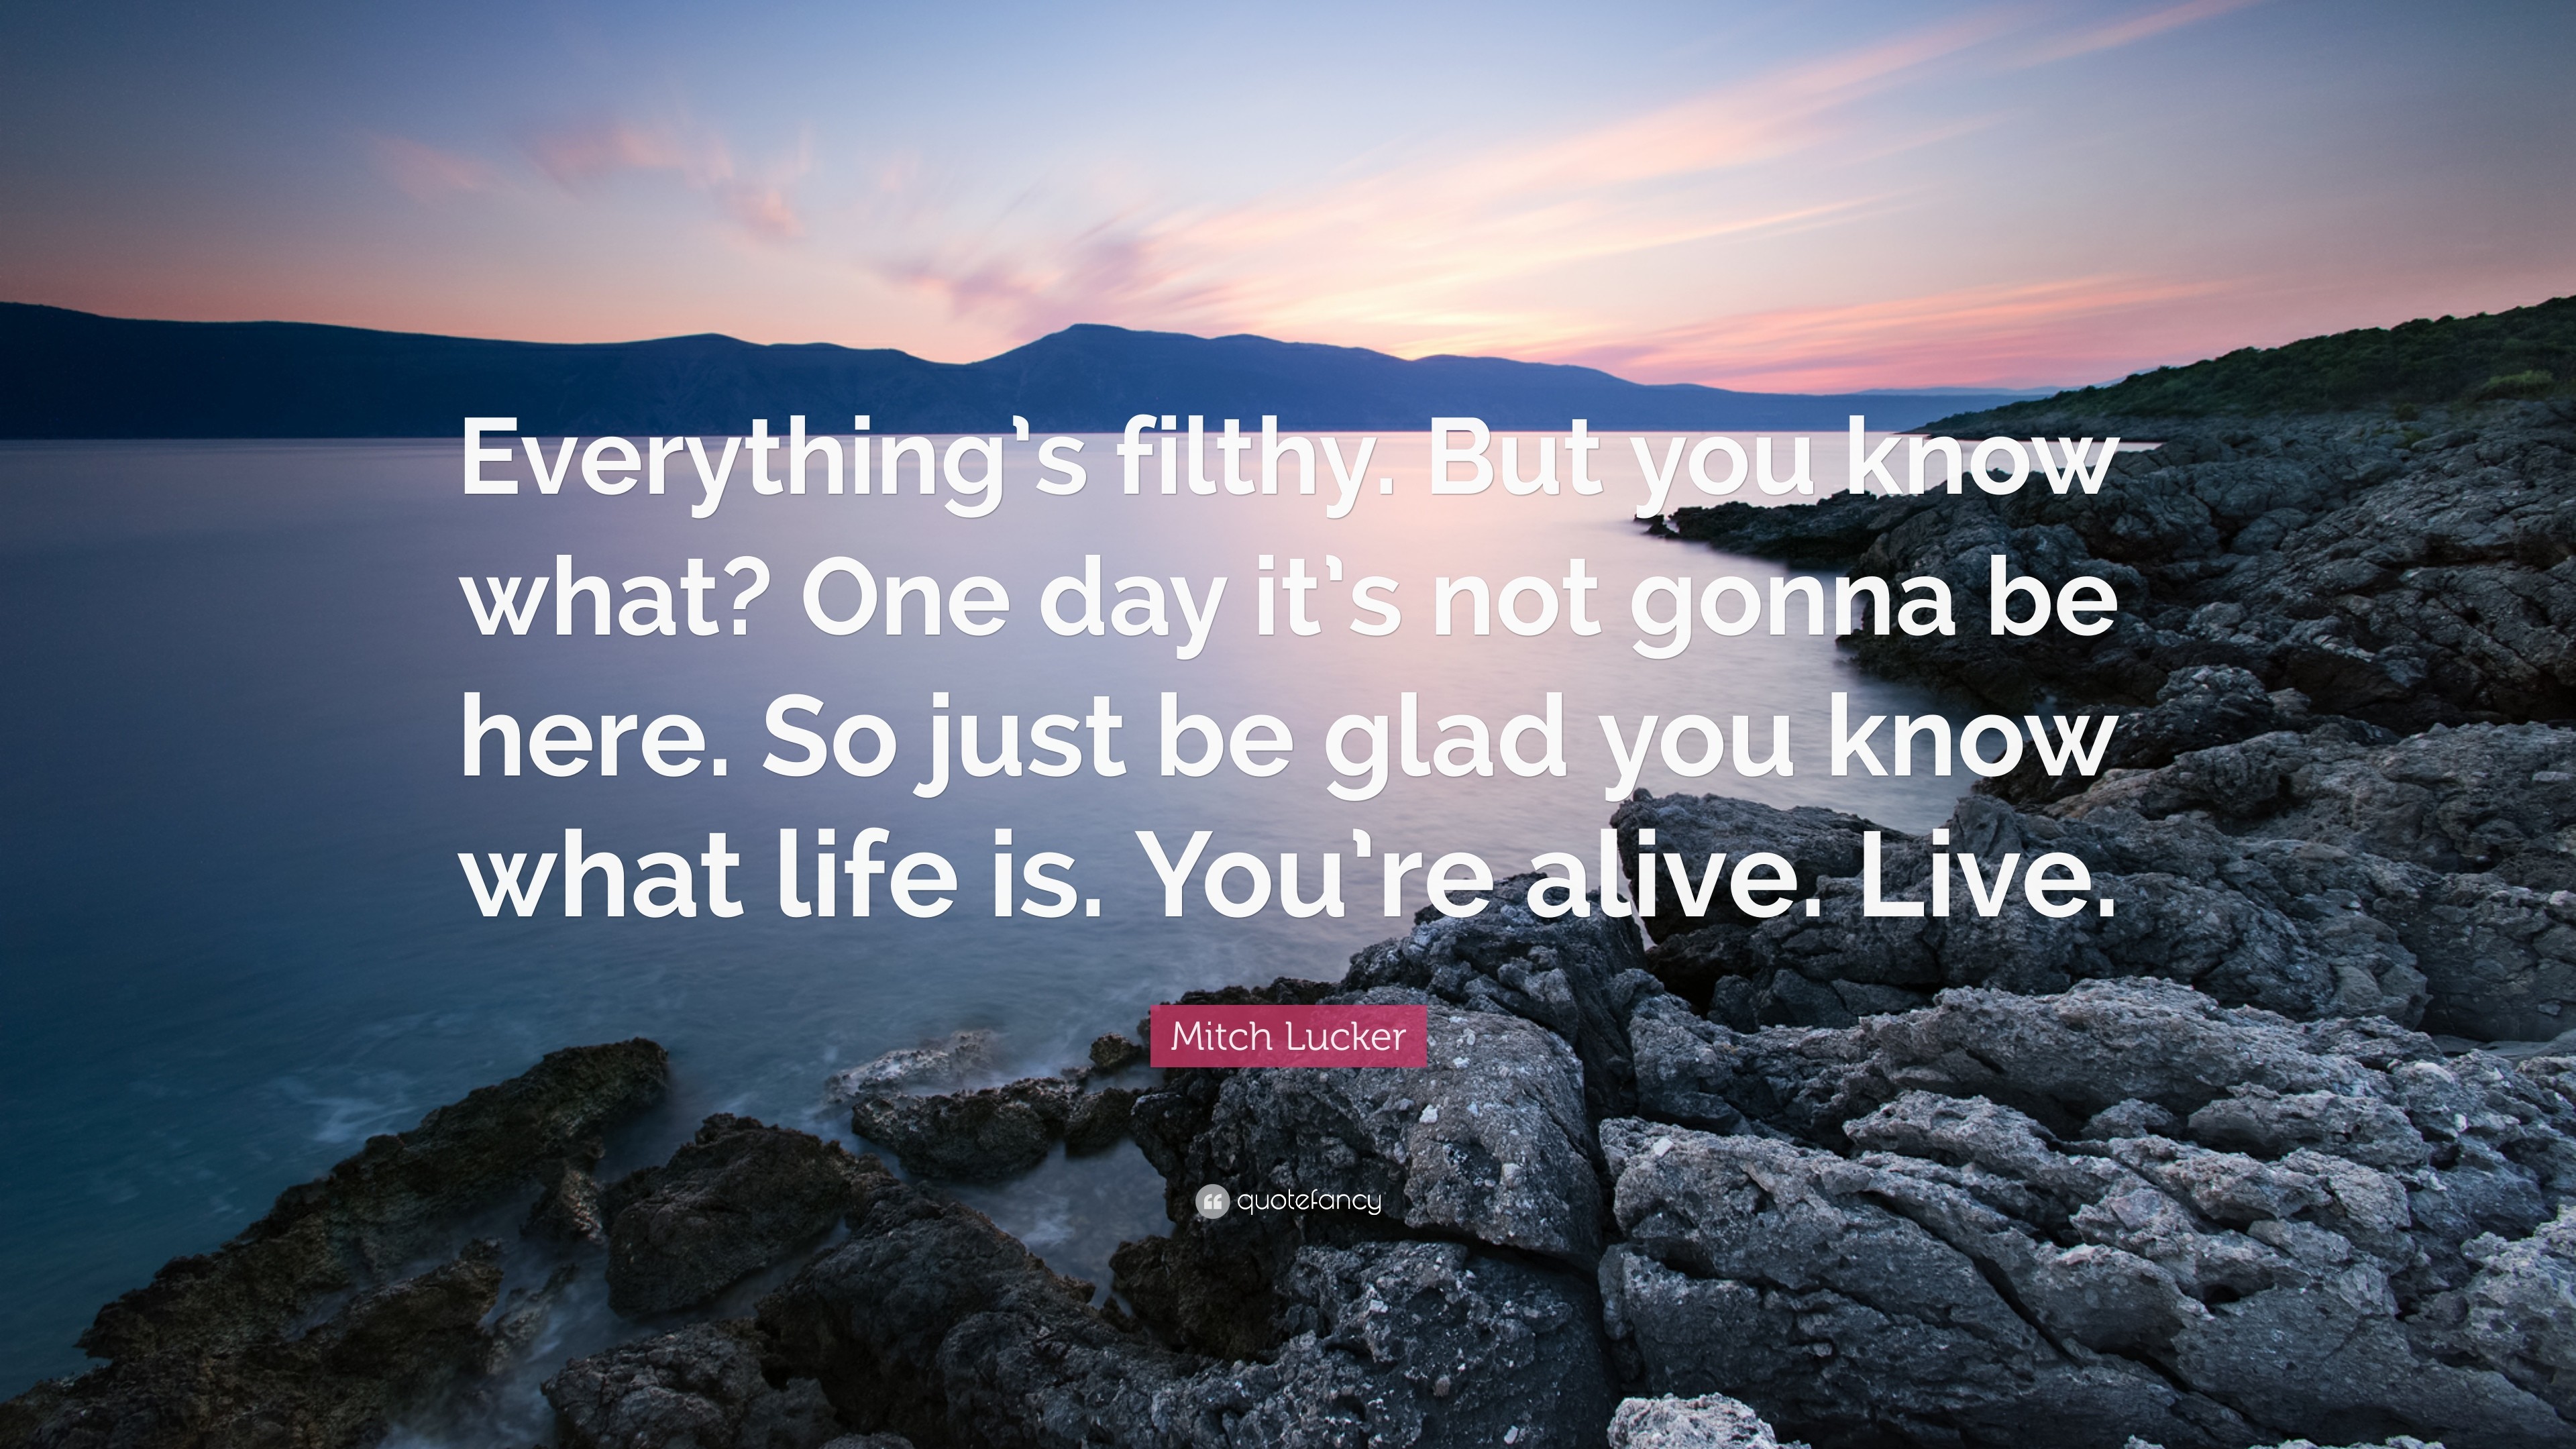 3840x2160 Mitch Lucker Quote: “Everything's filthy. But you know what? One day it's